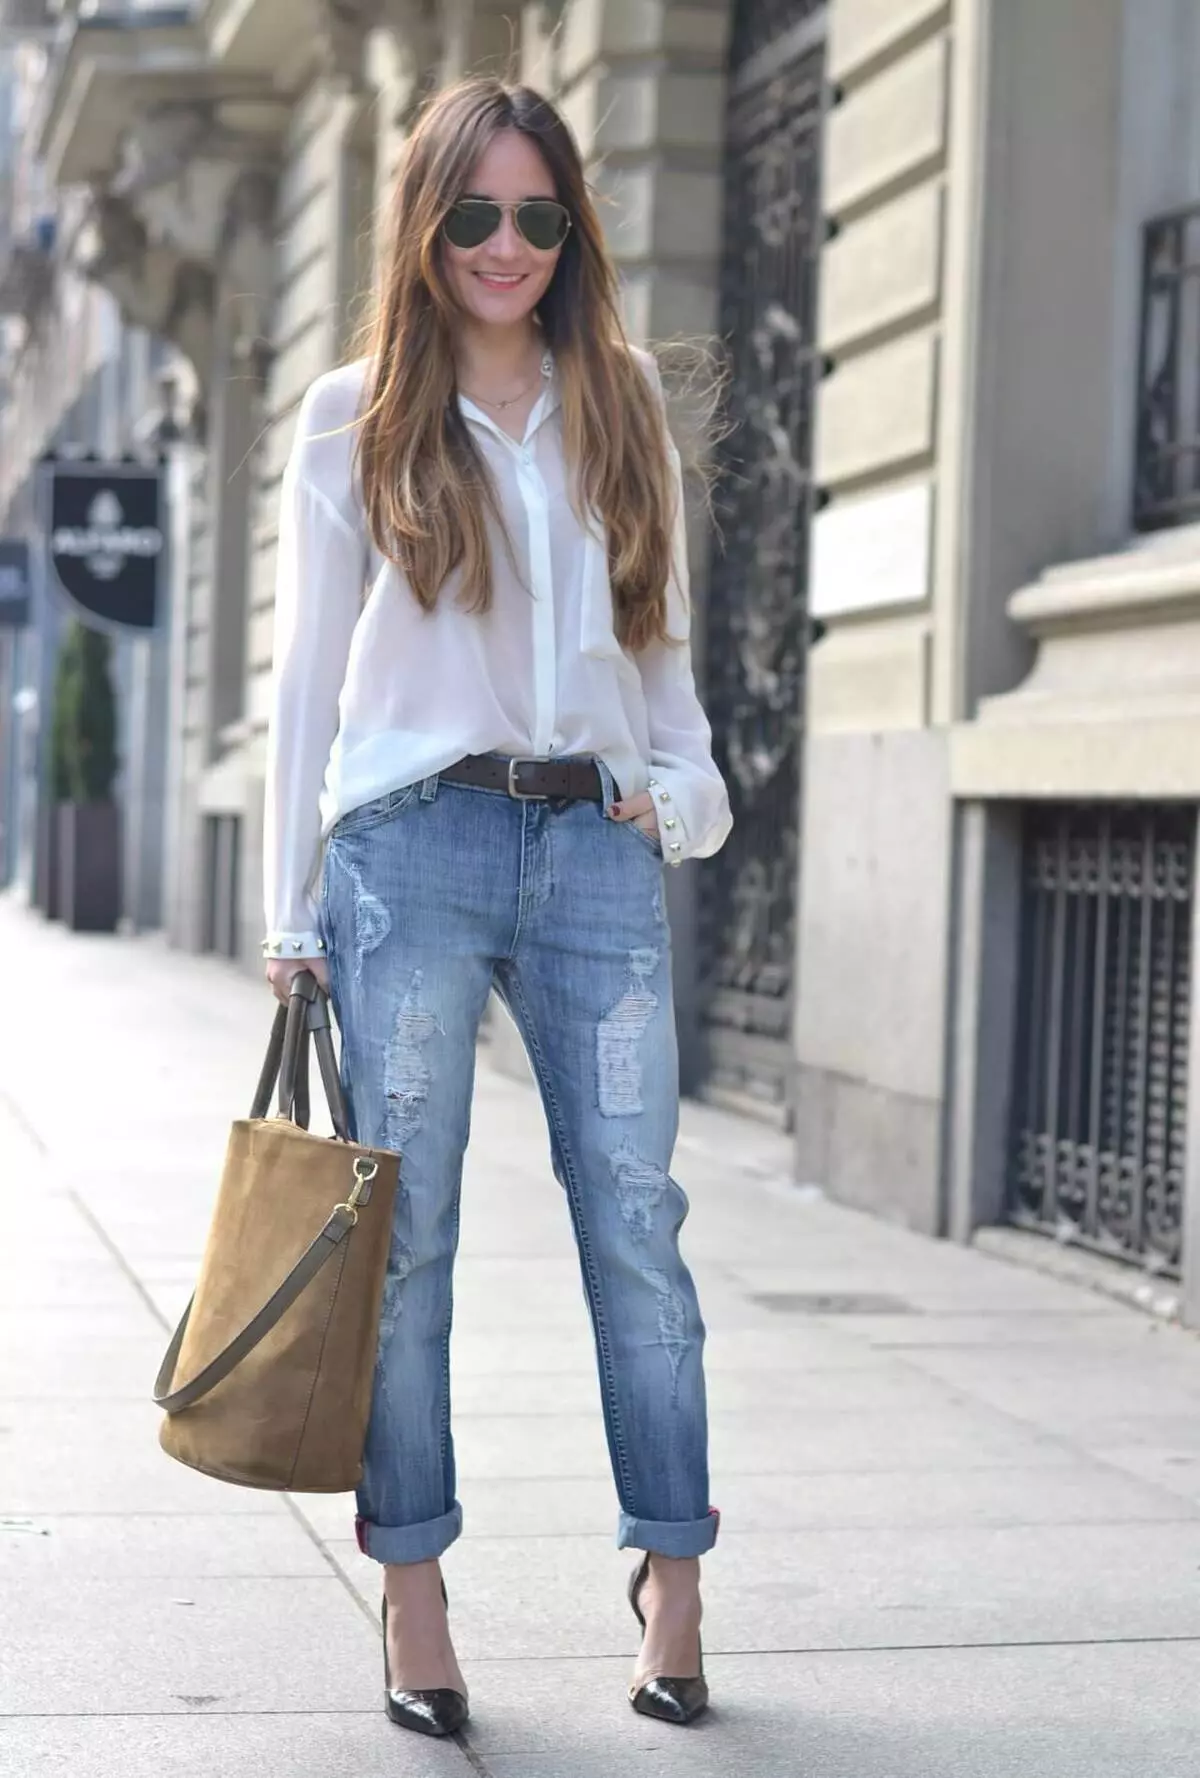 Ripped boyfriend jeans (40 photos): What to wear a holey boyfriend jeans with holes 1127_6